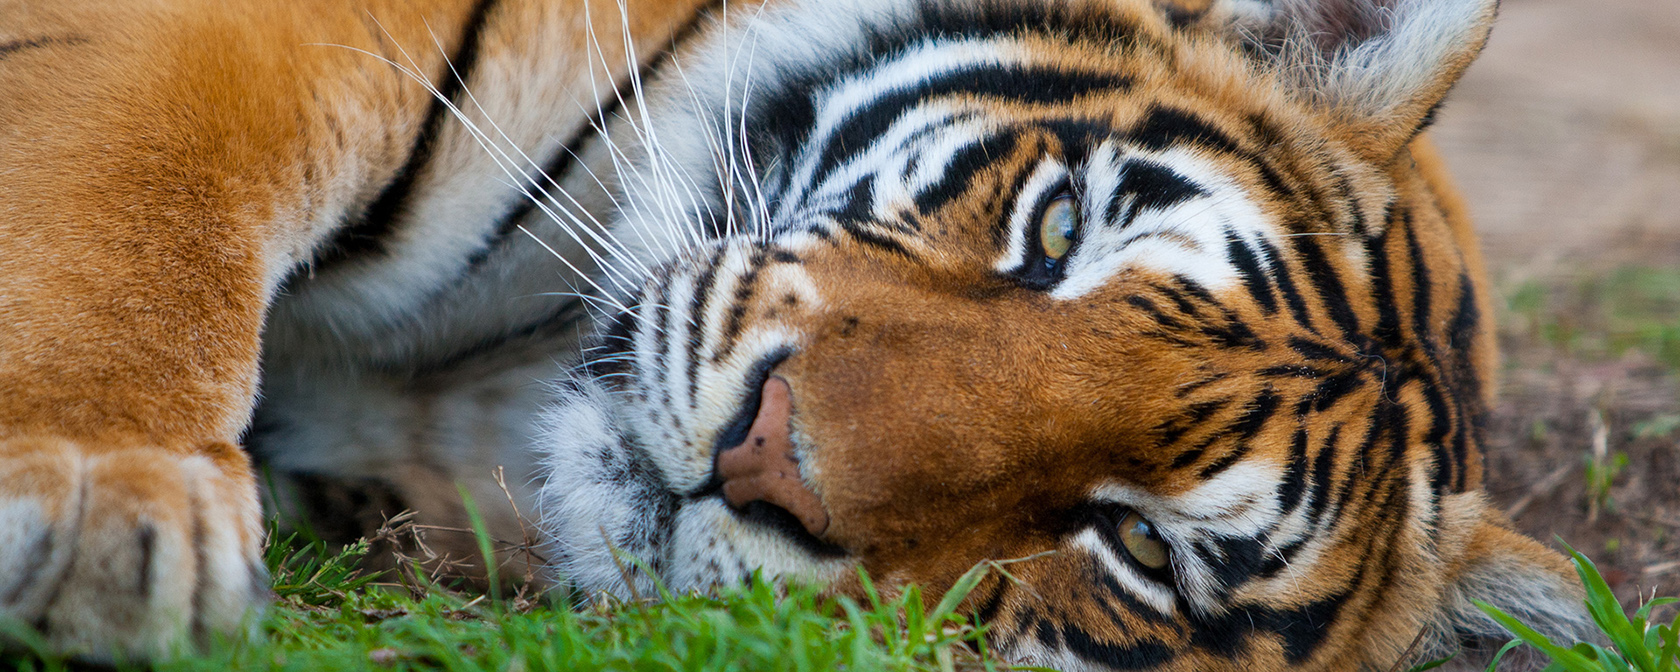 Celebrating the lawmakers who made 2022 a banner year for big cats and other animals